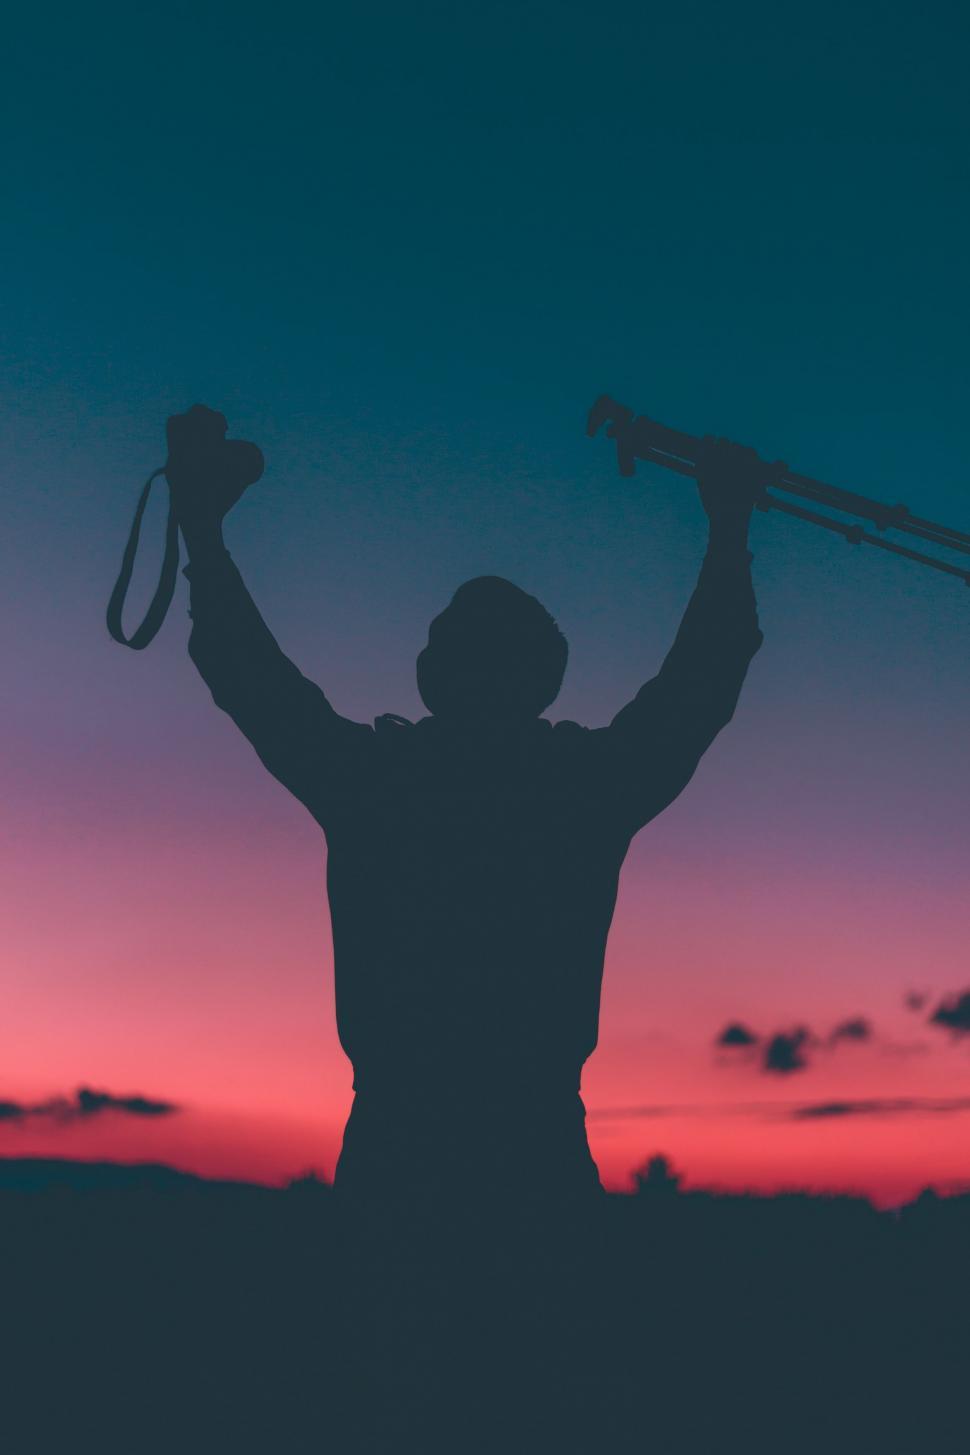 Free Image of Silhouette of Man Holding Skis 